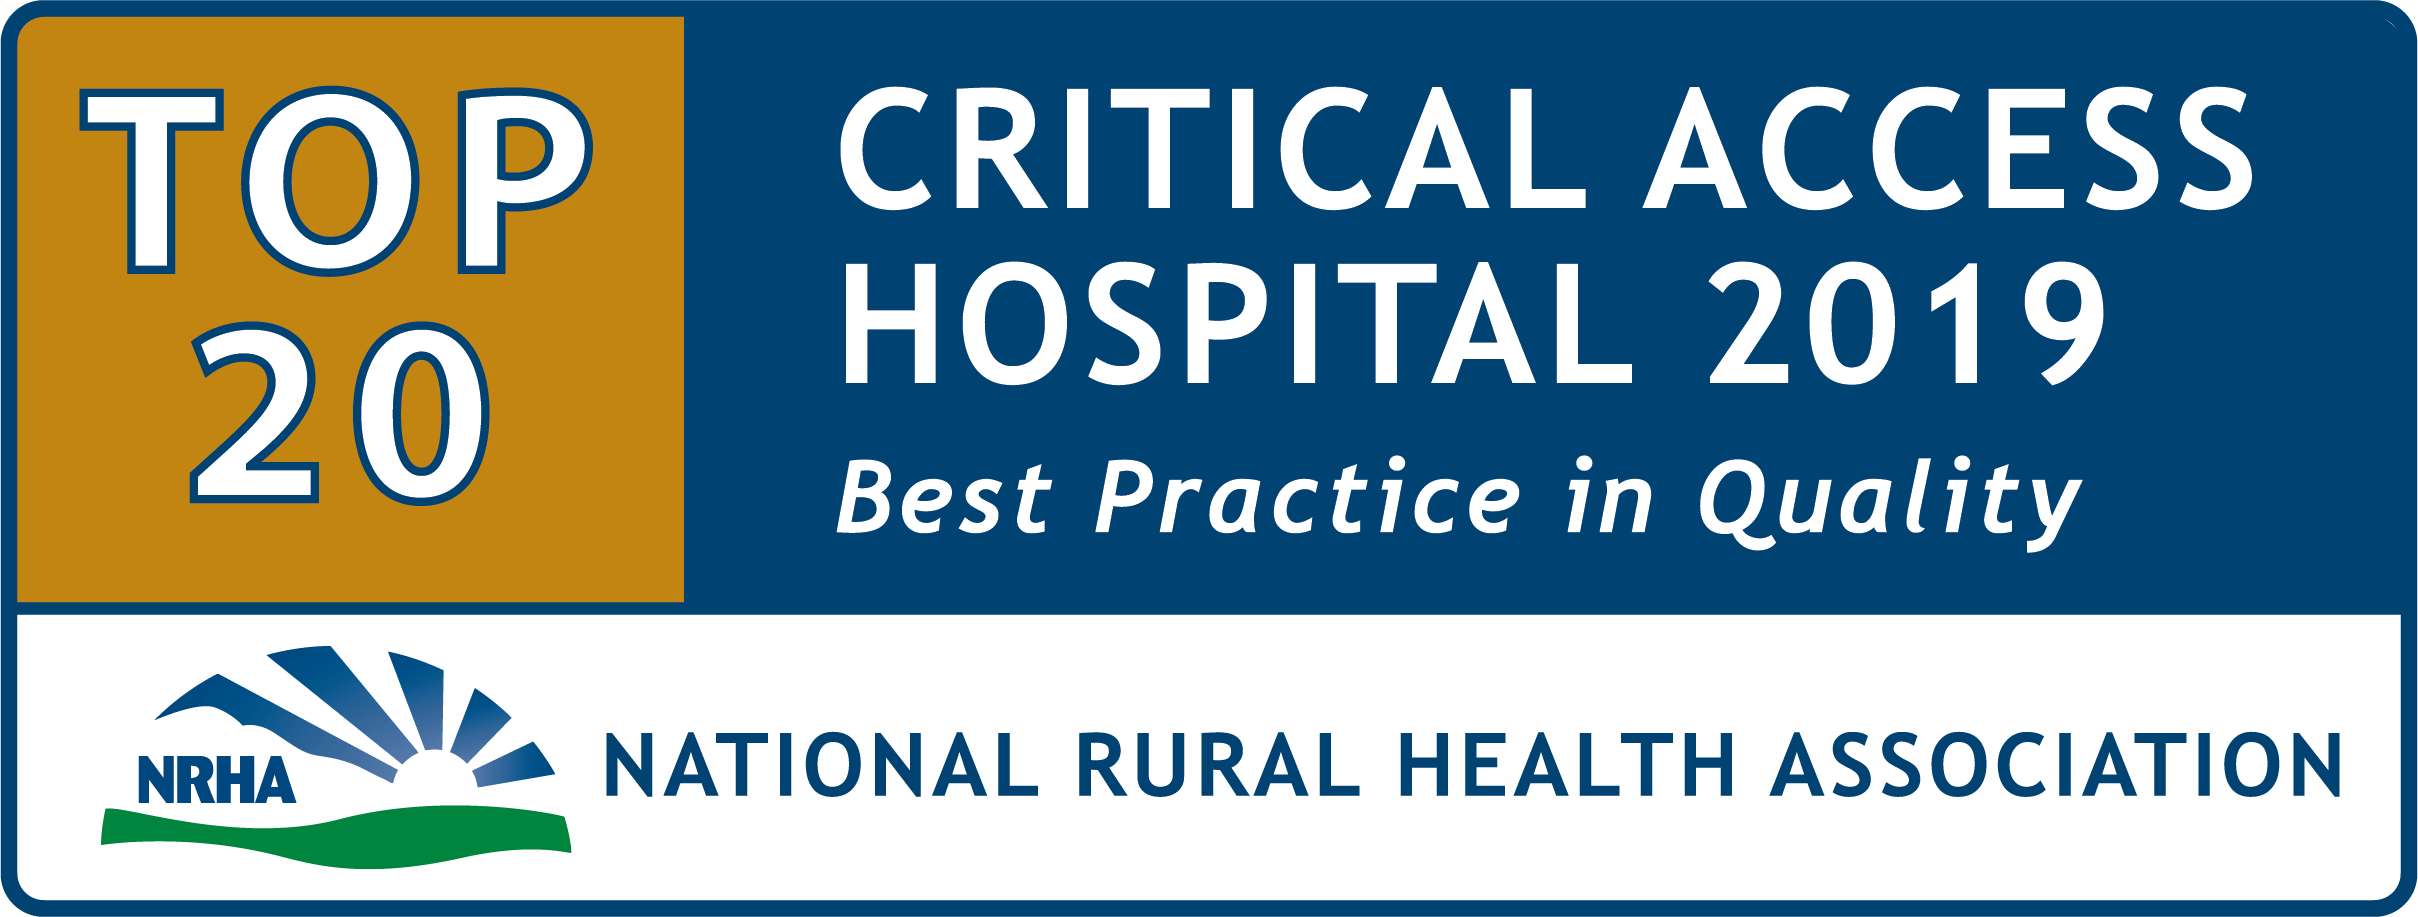 Top 20 Critical Access Hospitals for Quality